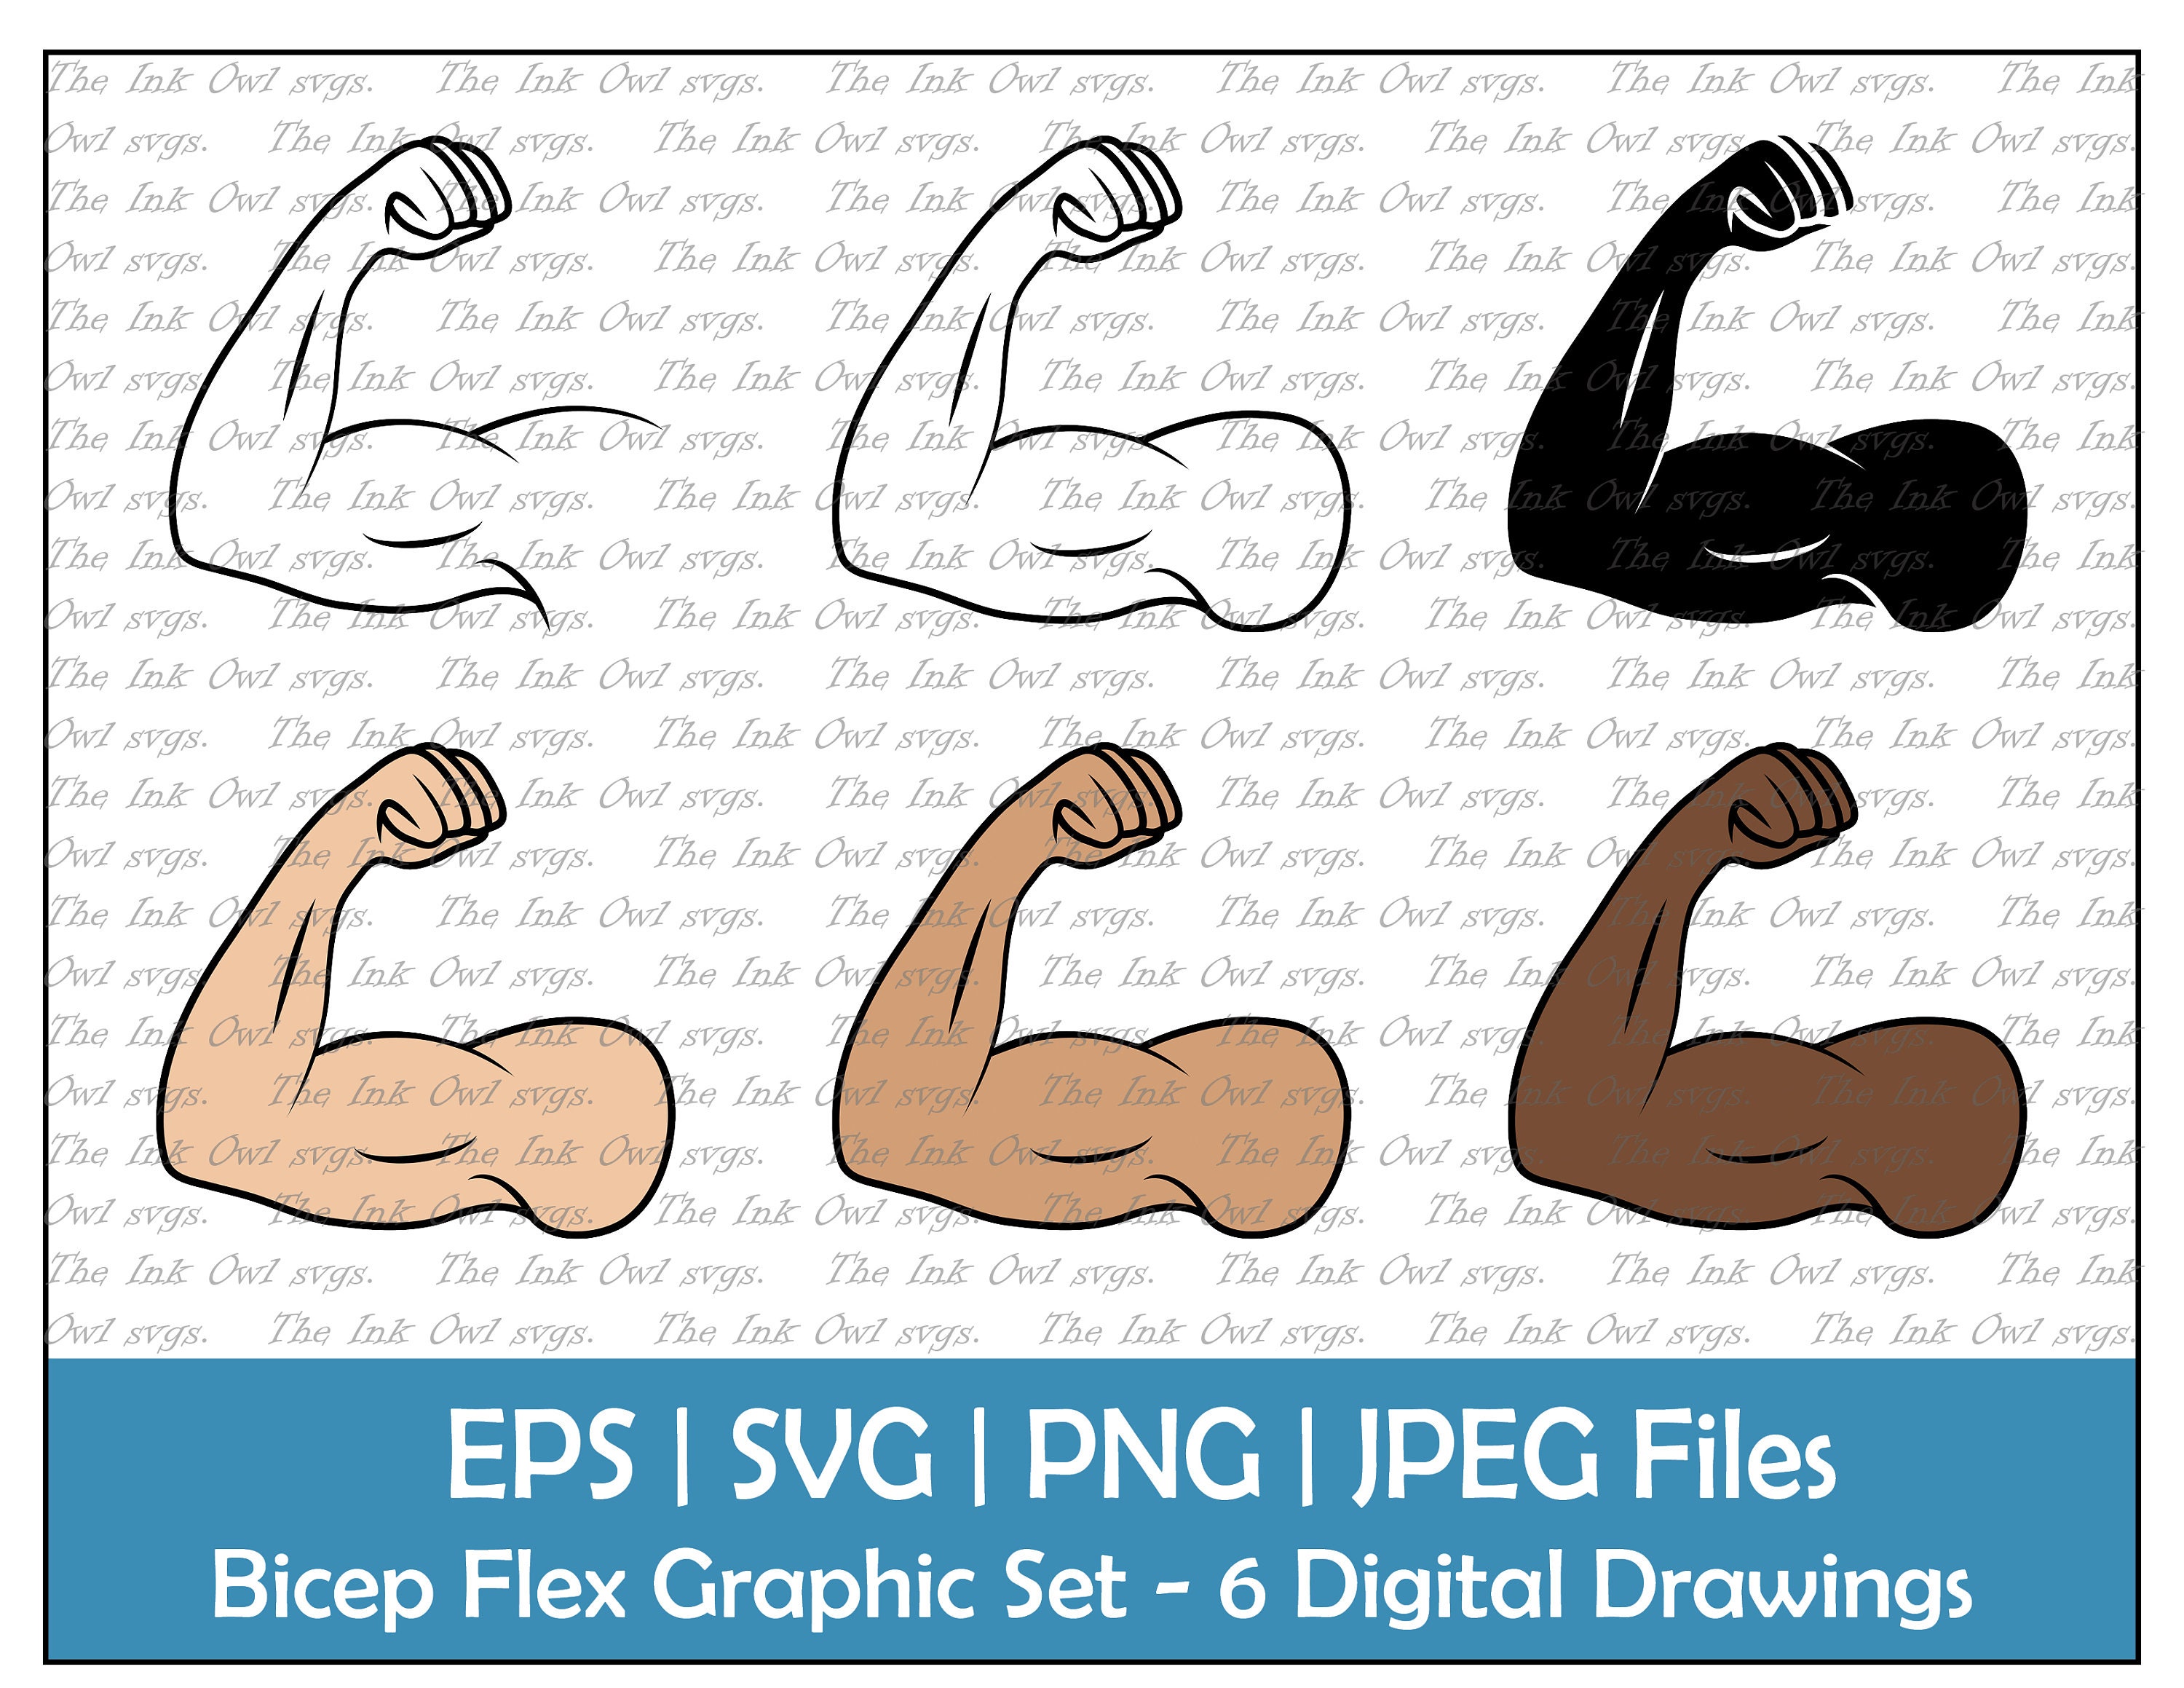 Strong arm, bodybuilding vector line icon, linear concept, outline sign,  symbol Stock Vector Image & Art - Alamy